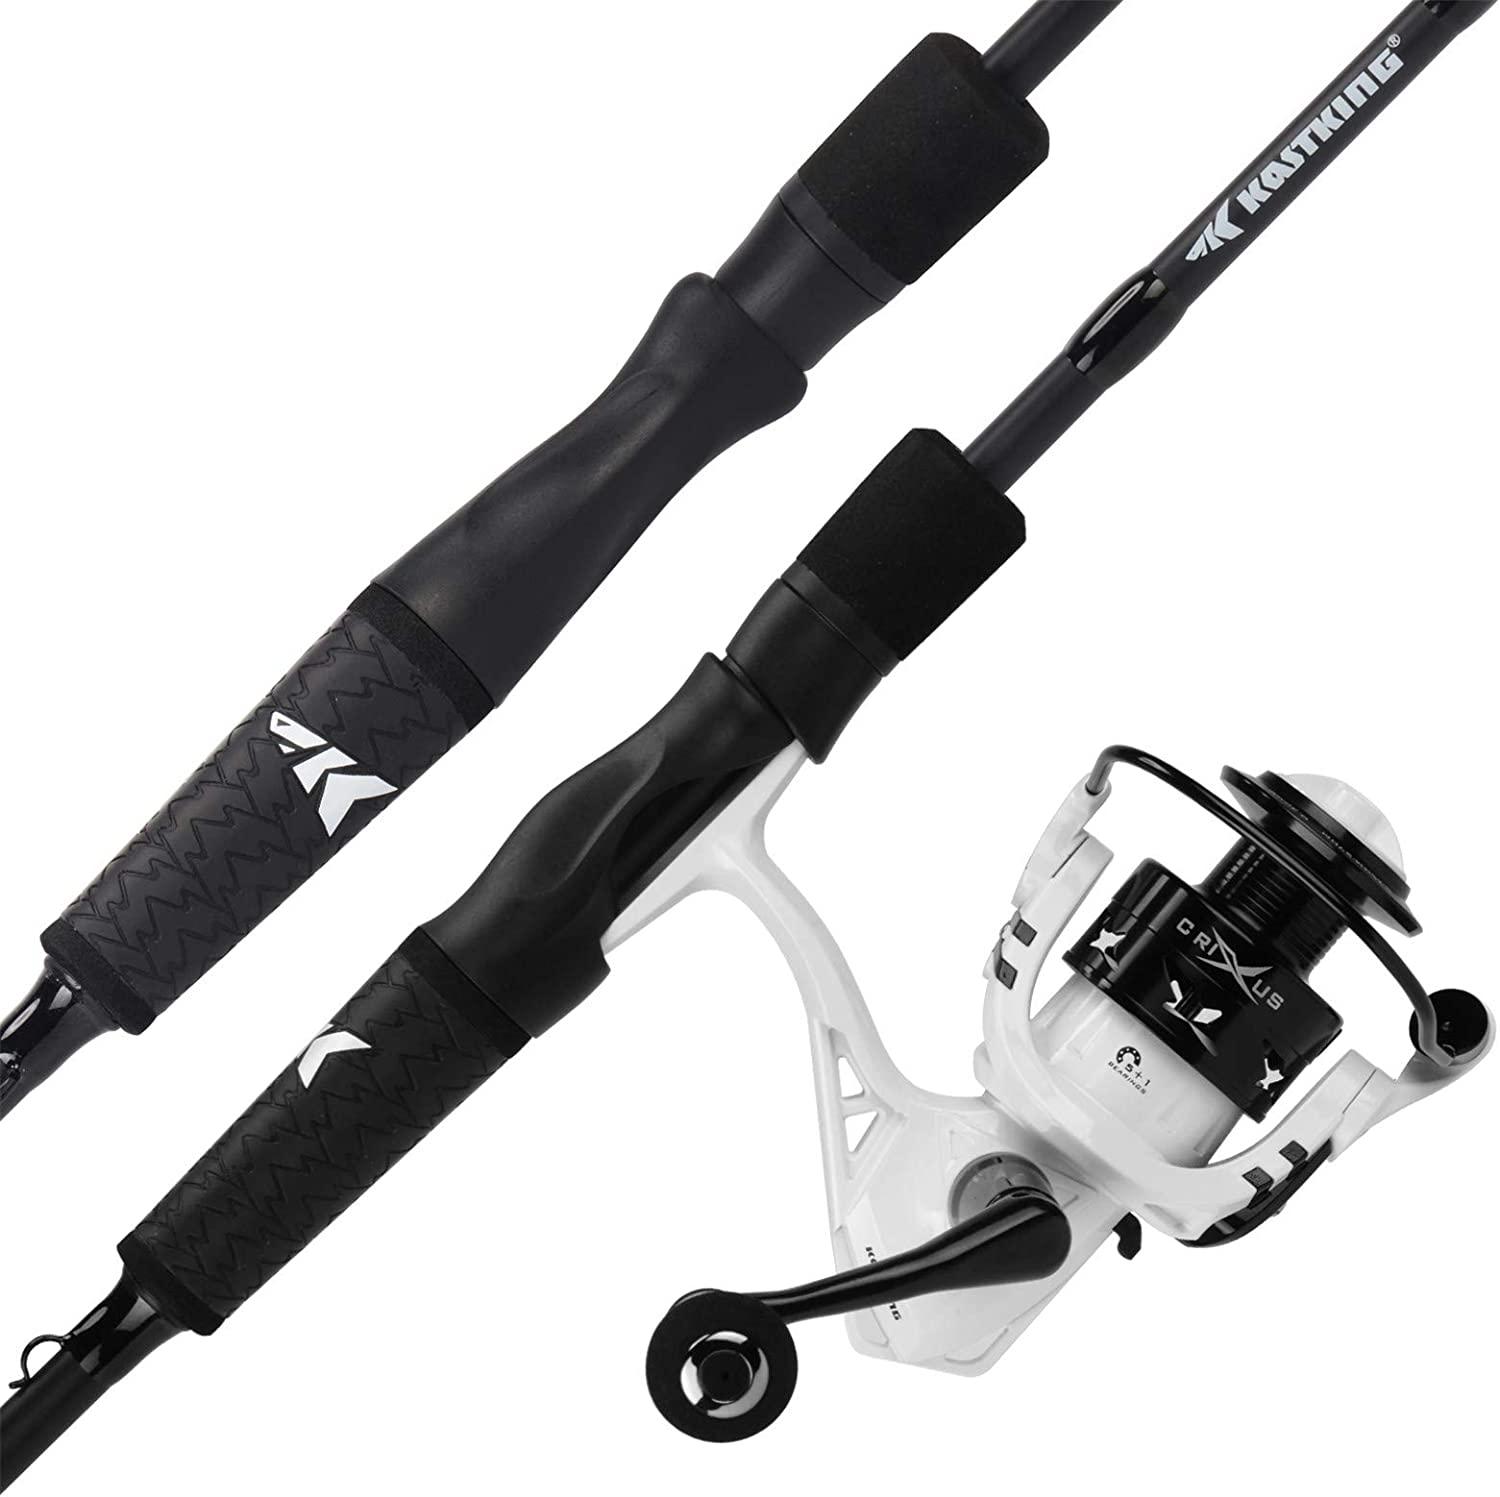 KastKing Crixus Fishing Rod and Reel Combo, Baitcasting Combo, IM6 Graphite  Blank Rods,SuperPolymer Handle A: Spin-6'6 Medium-2pcs,3000 Reel